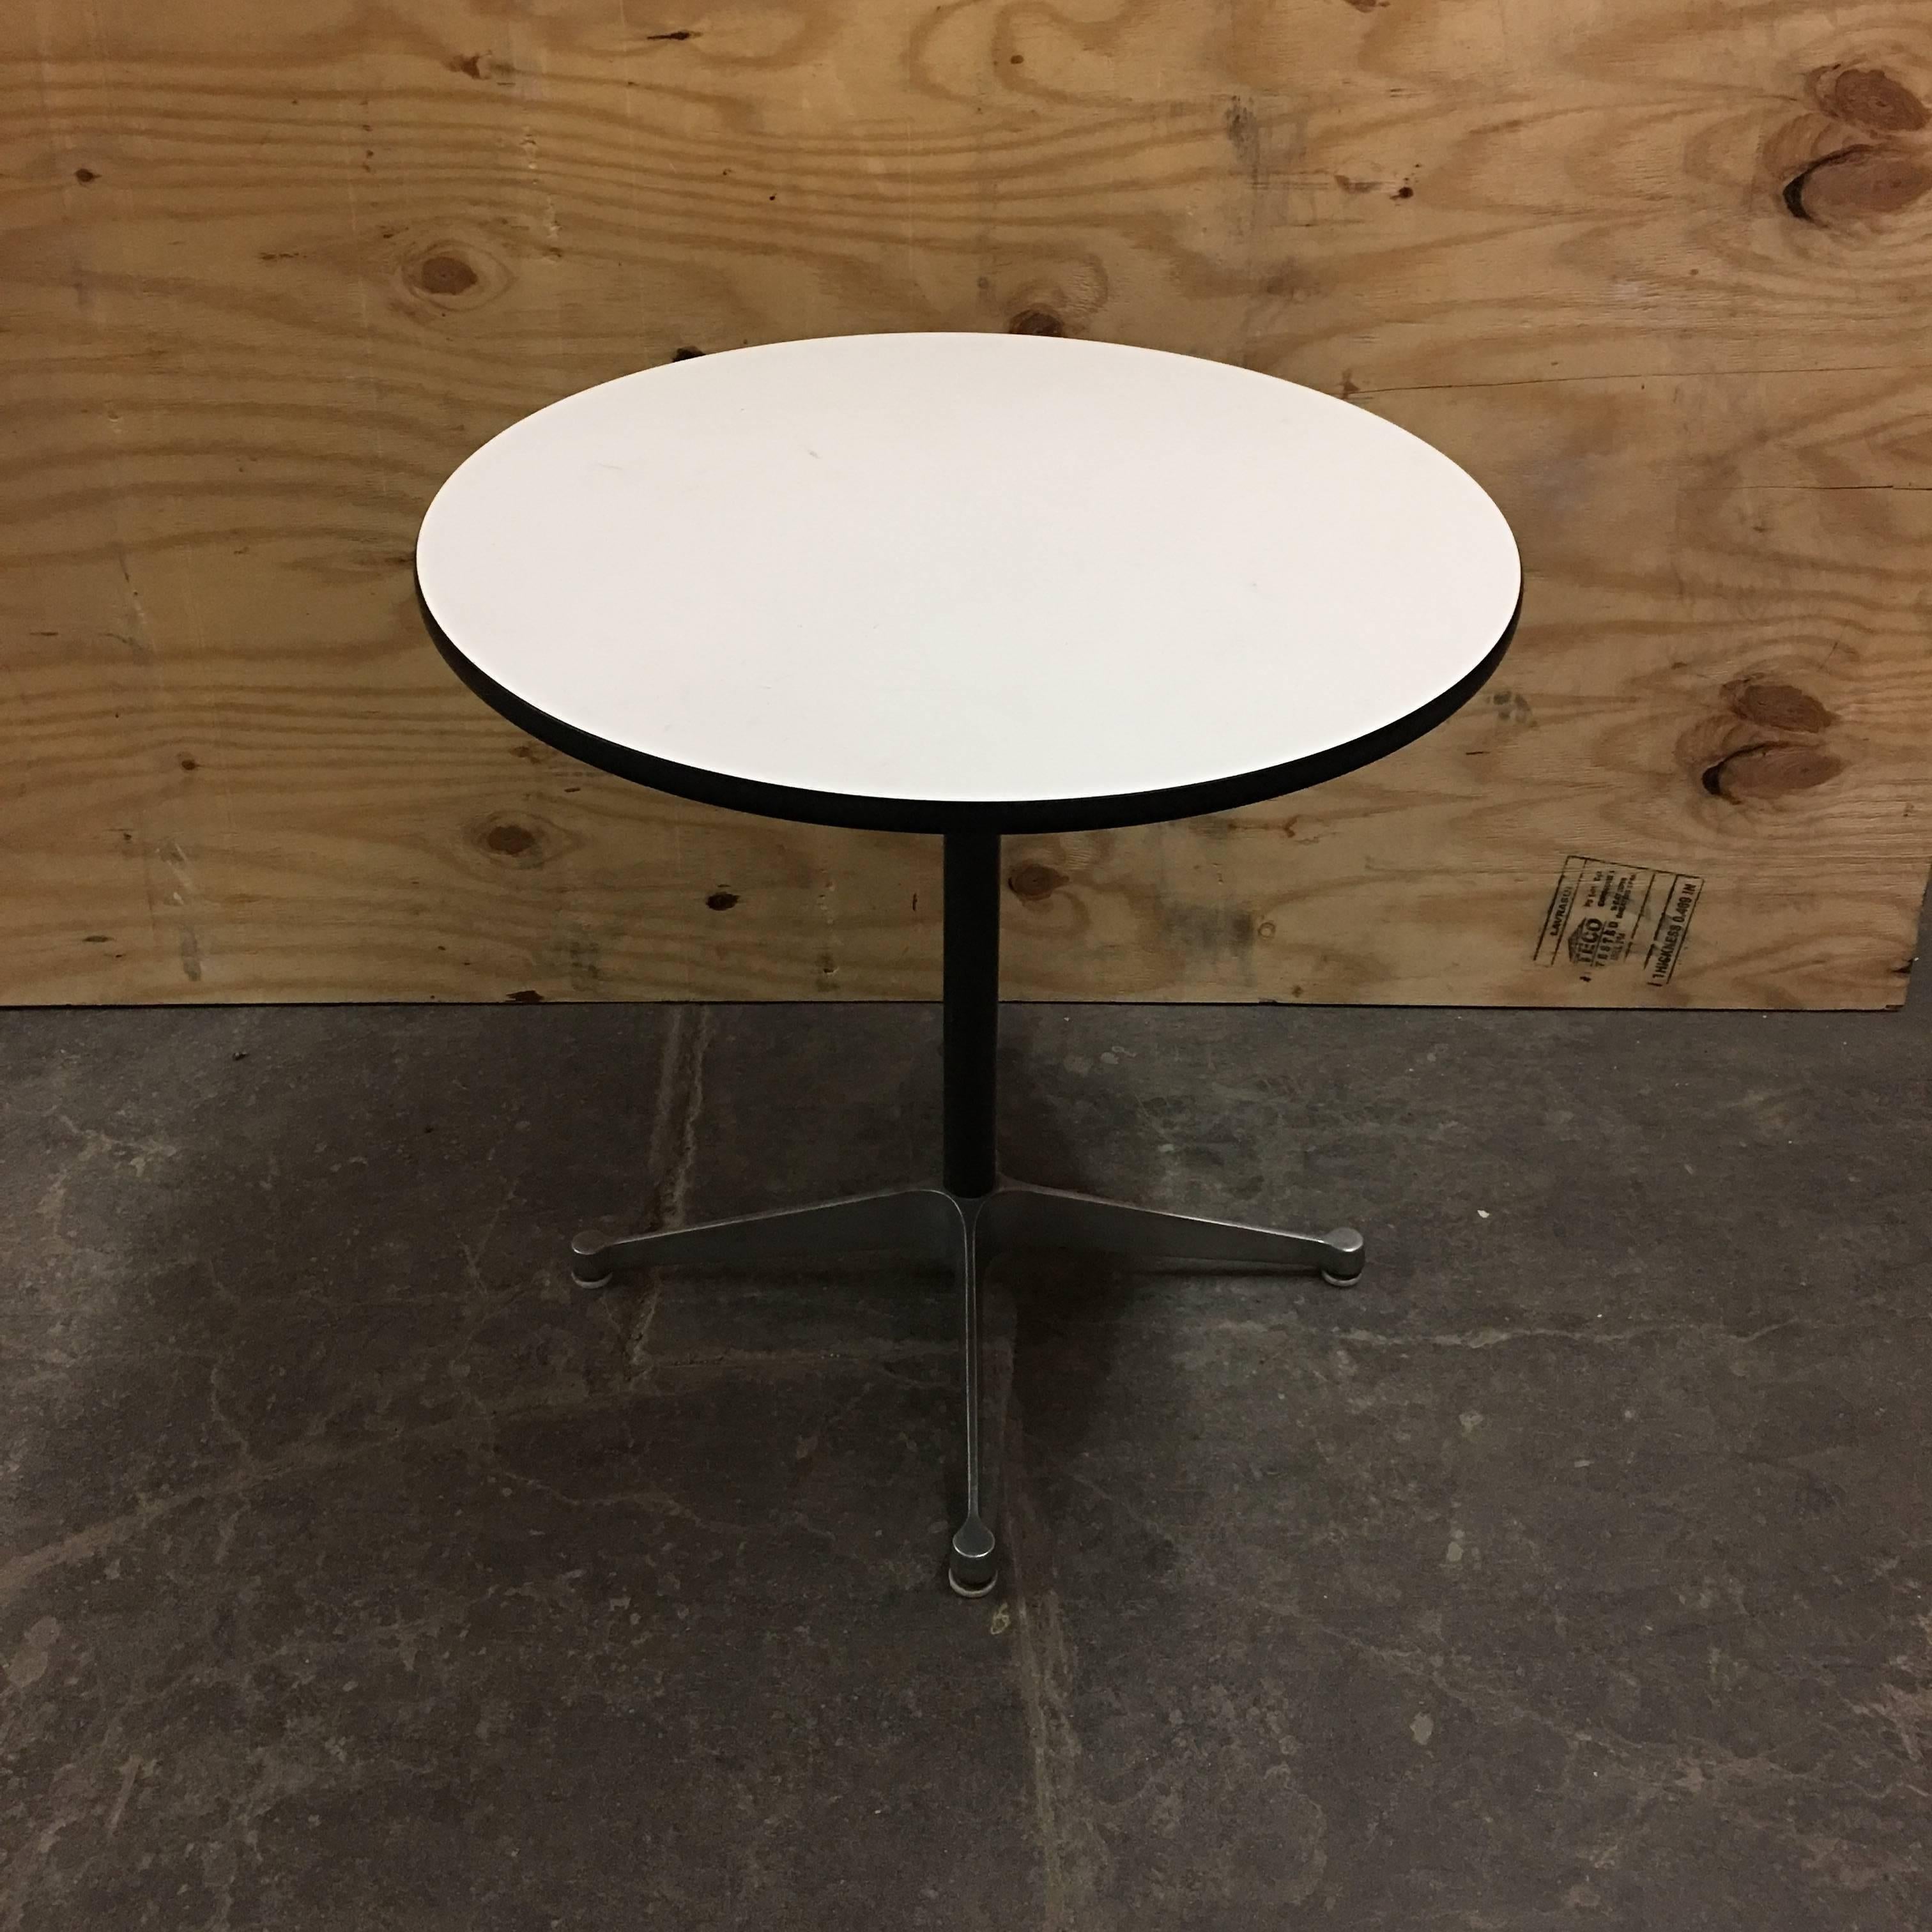 Herman Miller Eames dining table in rare size 30